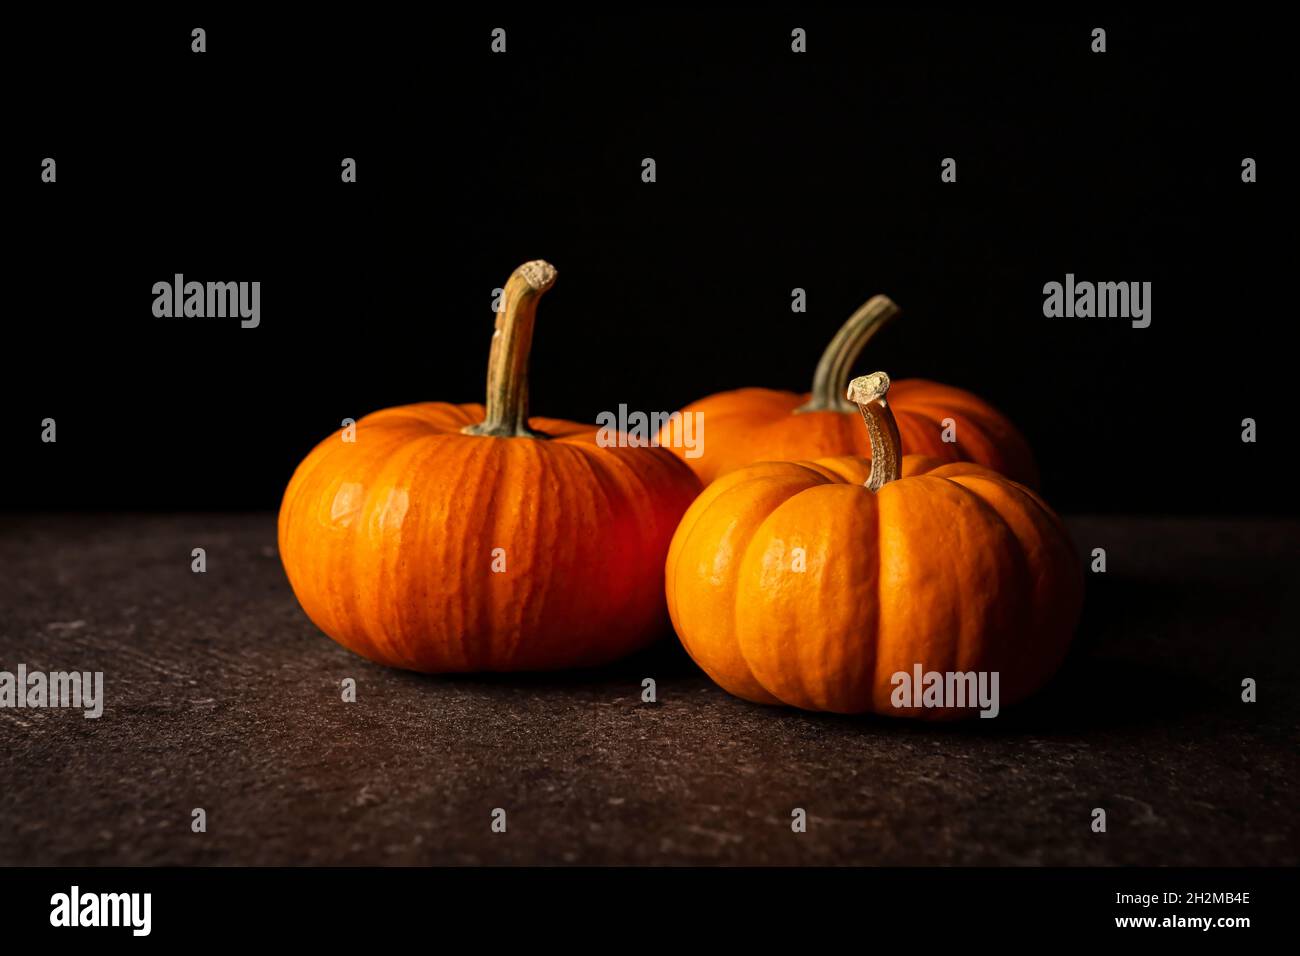 Small orange pumpkins with black background. Pumpkins are widely grown for commercial use and as food, aesthetics, and recreational purposes. Much con Stock Photo